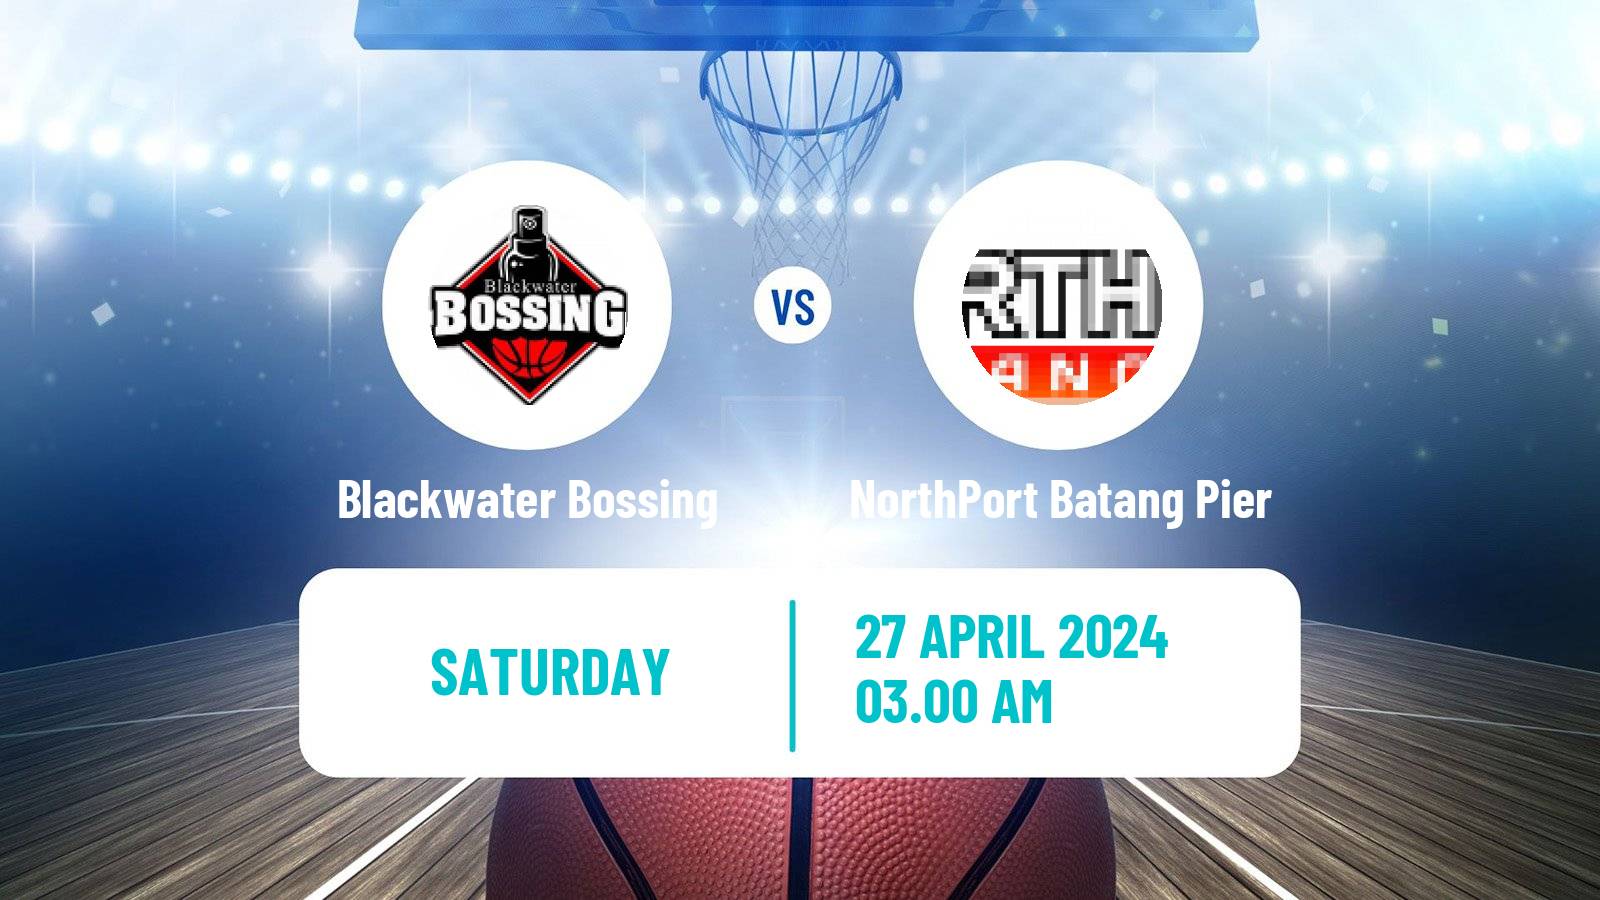 Basketball Philippines Cup Blackwater Bossing - NorthPort Batang Pier